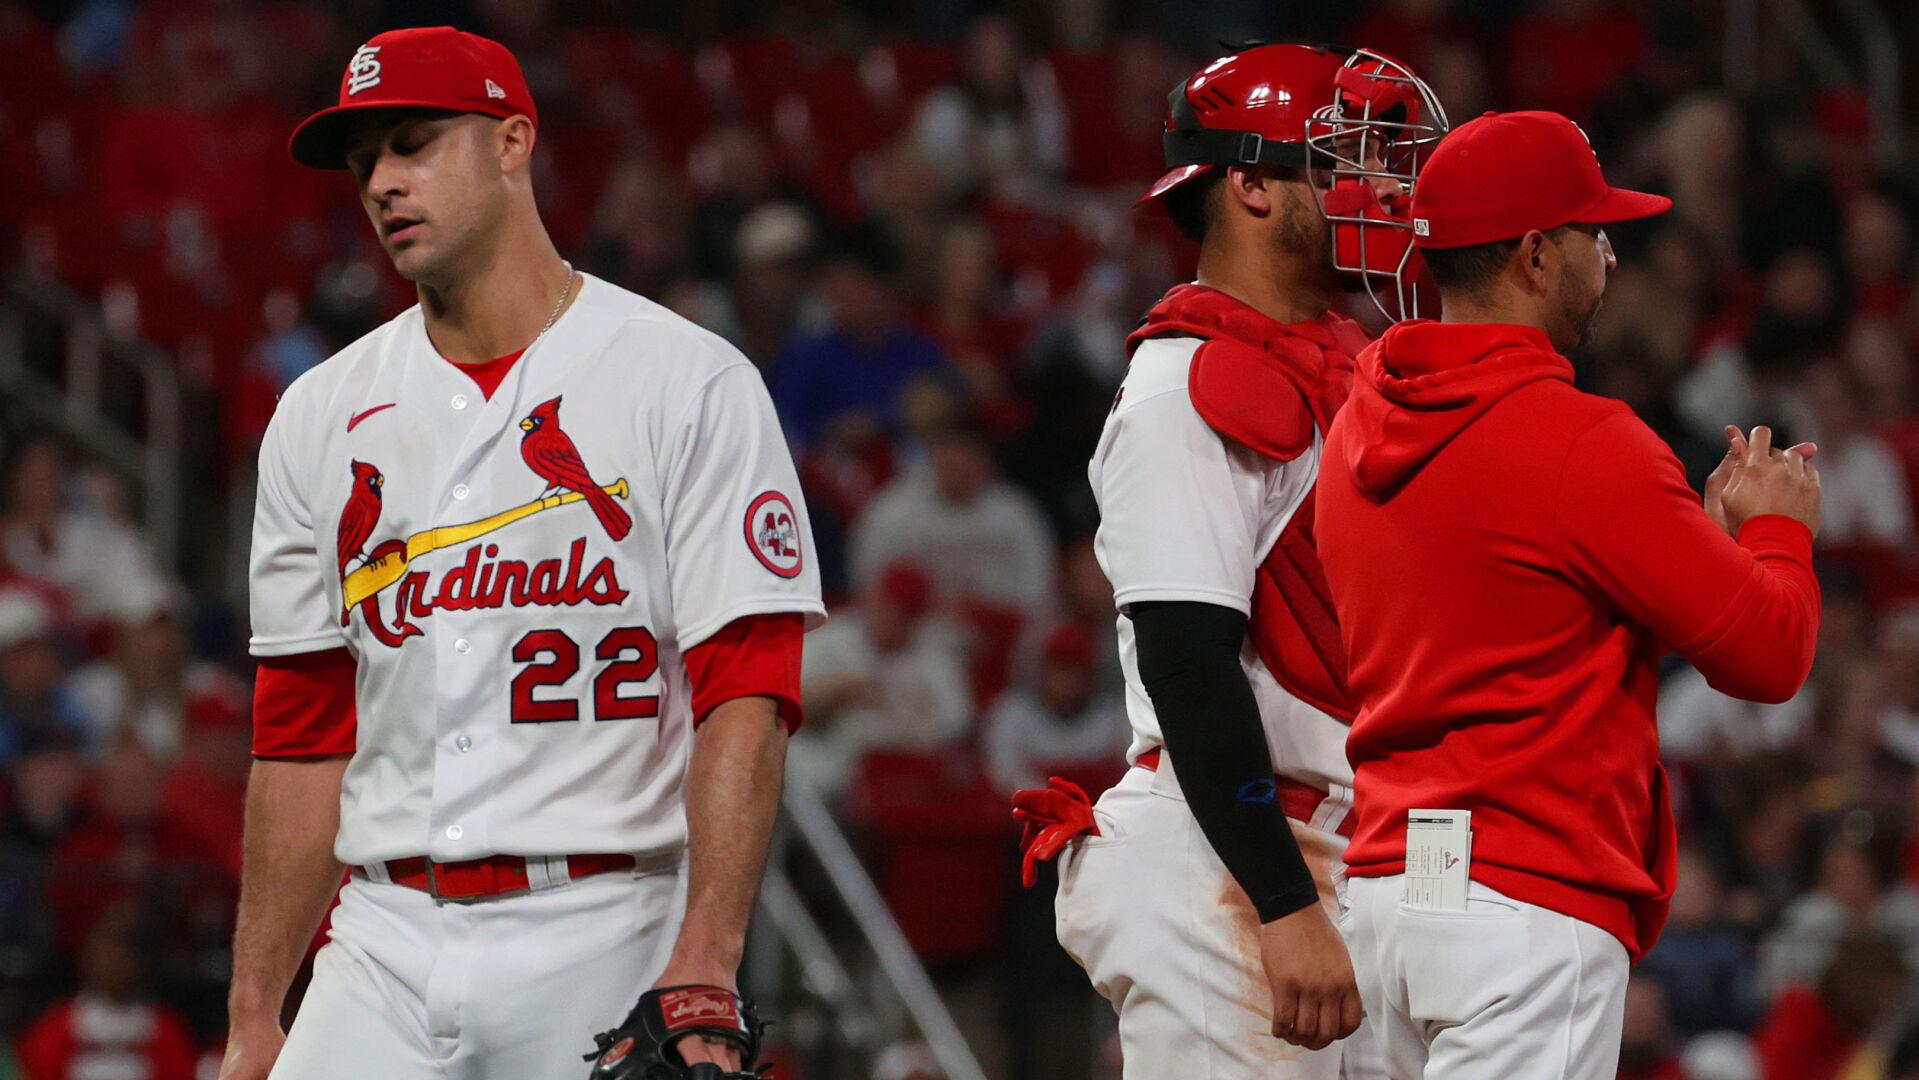 How Jack Flaherty's strong outing suddenly turned into a Cardinals' loss to the Diamondbacks